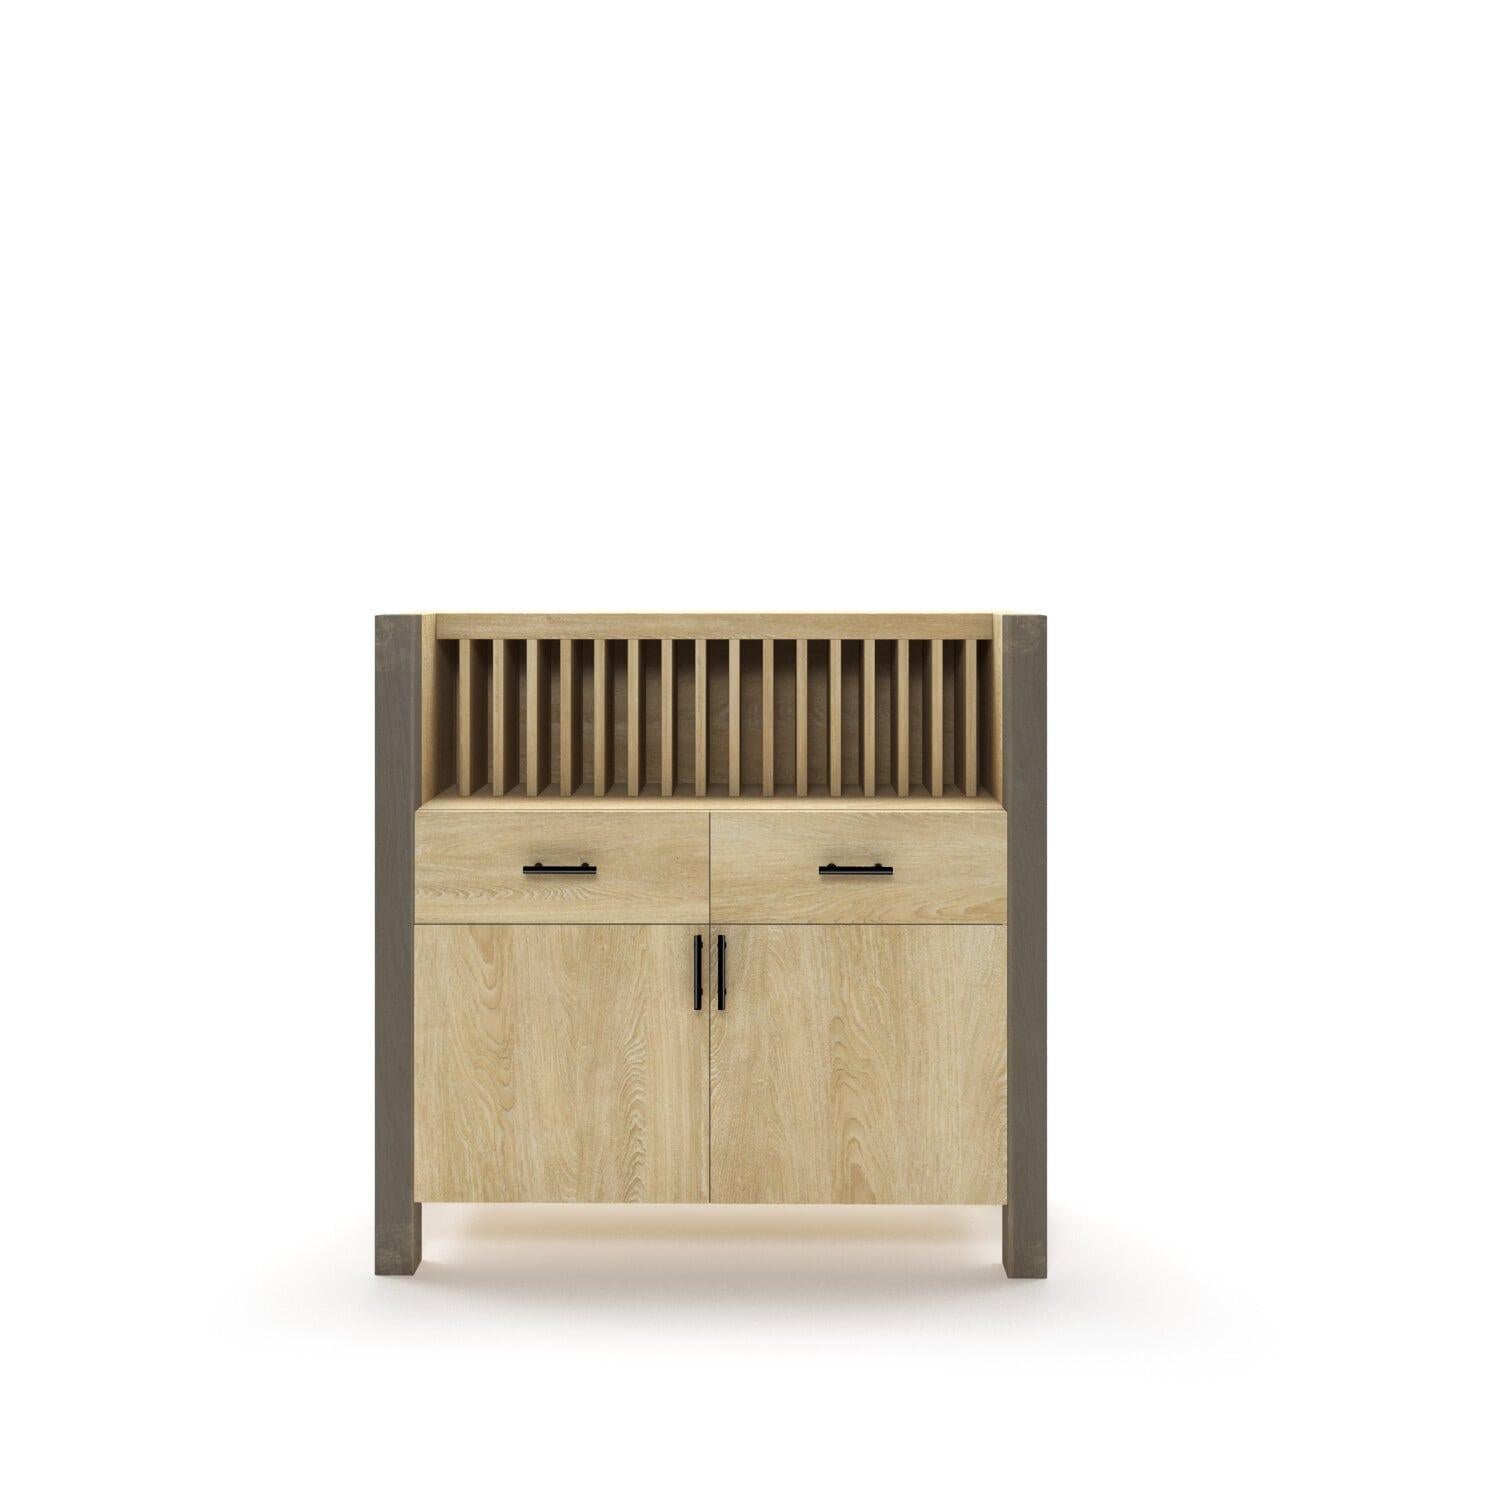 The Enn Sideboard is ideal for storage and organization. It's made of massive oak for a timeless, classic look. Featuring two doors and plenty of shelf space.

All Tektōn pieces are made of natural massive wood.
Small variations may be found due to